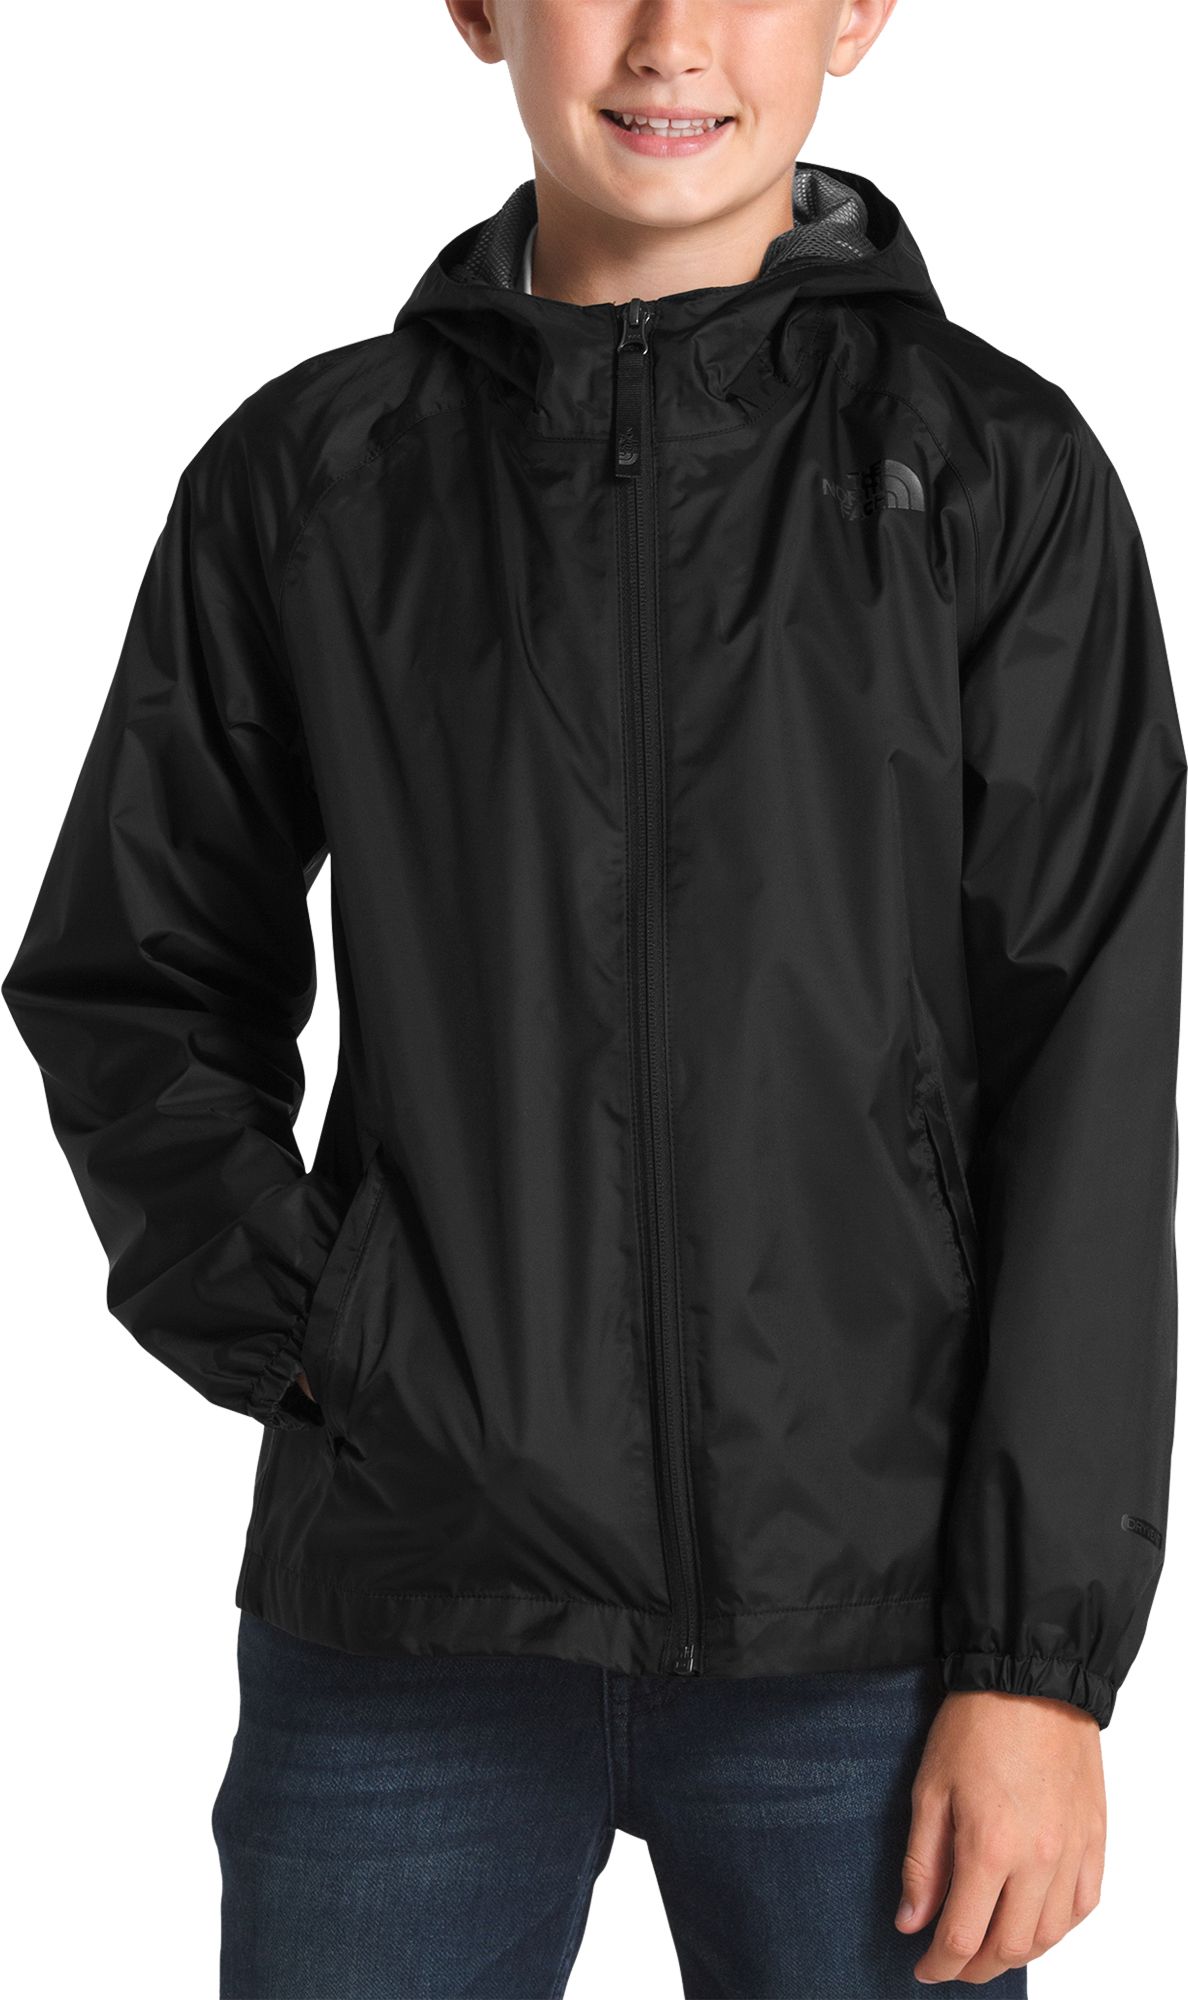 north face outlet rain jacket